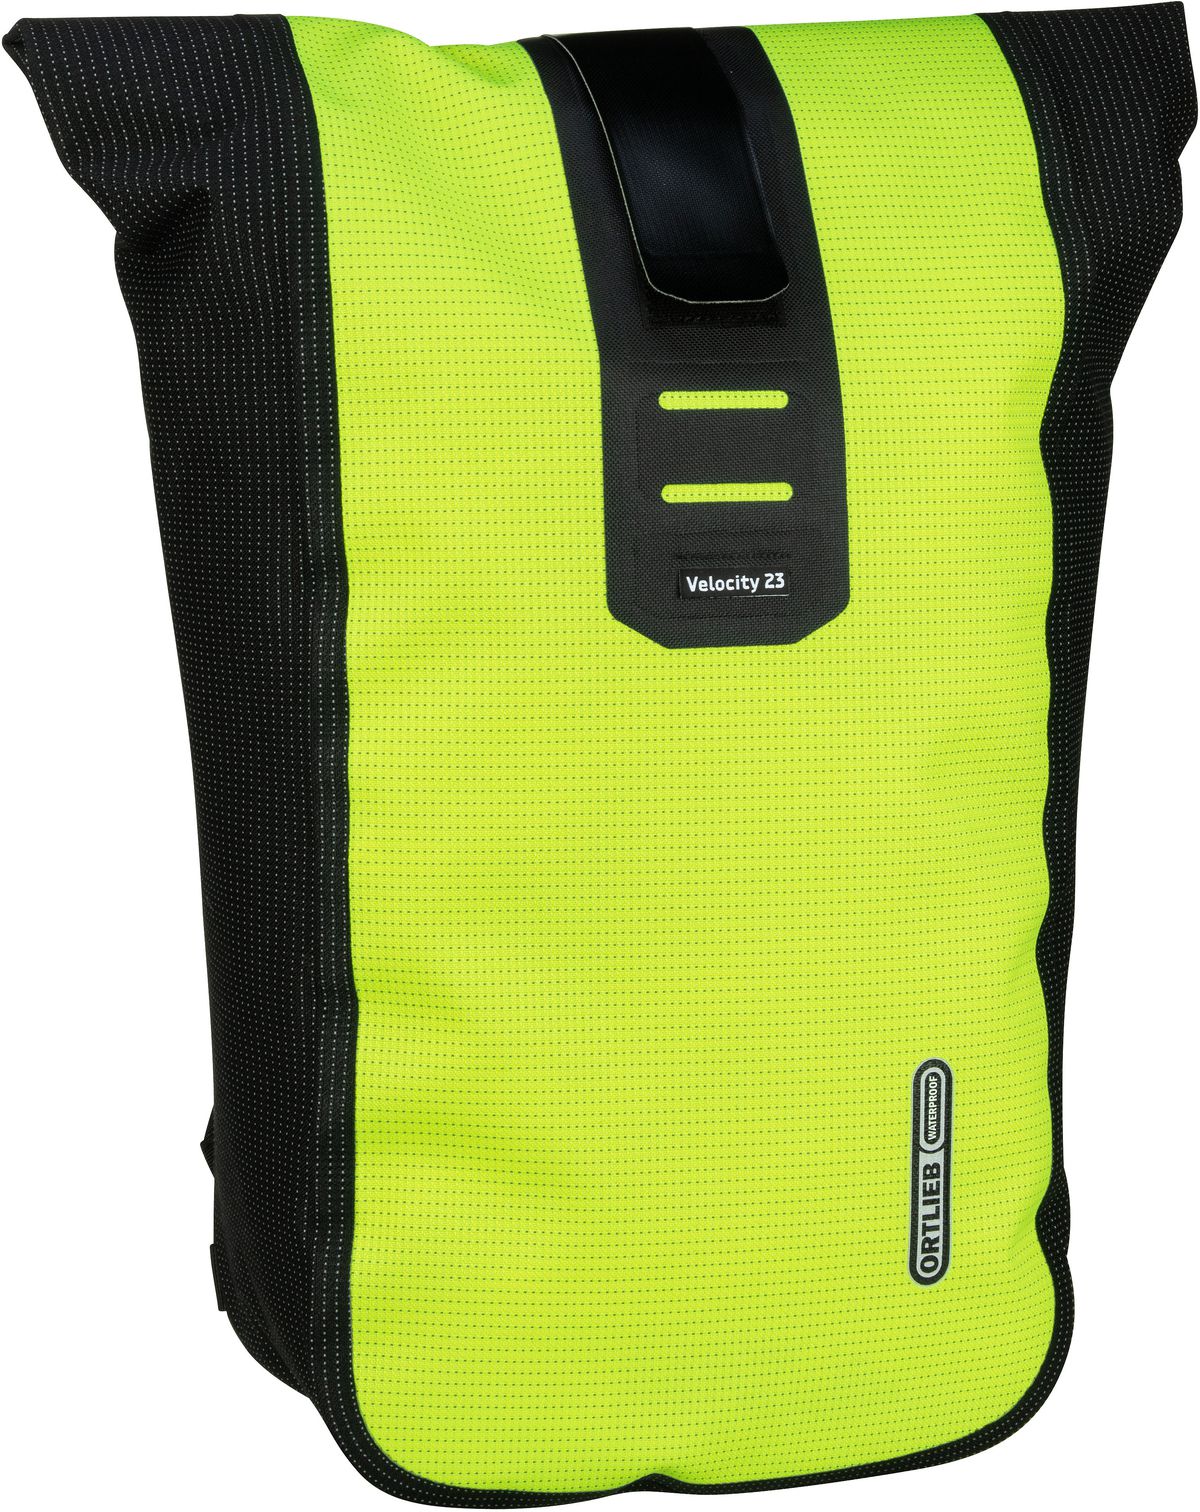 ORTLIEB Velocity High Visibility  in Gelb (23 Liter), Rucksack / Backpack